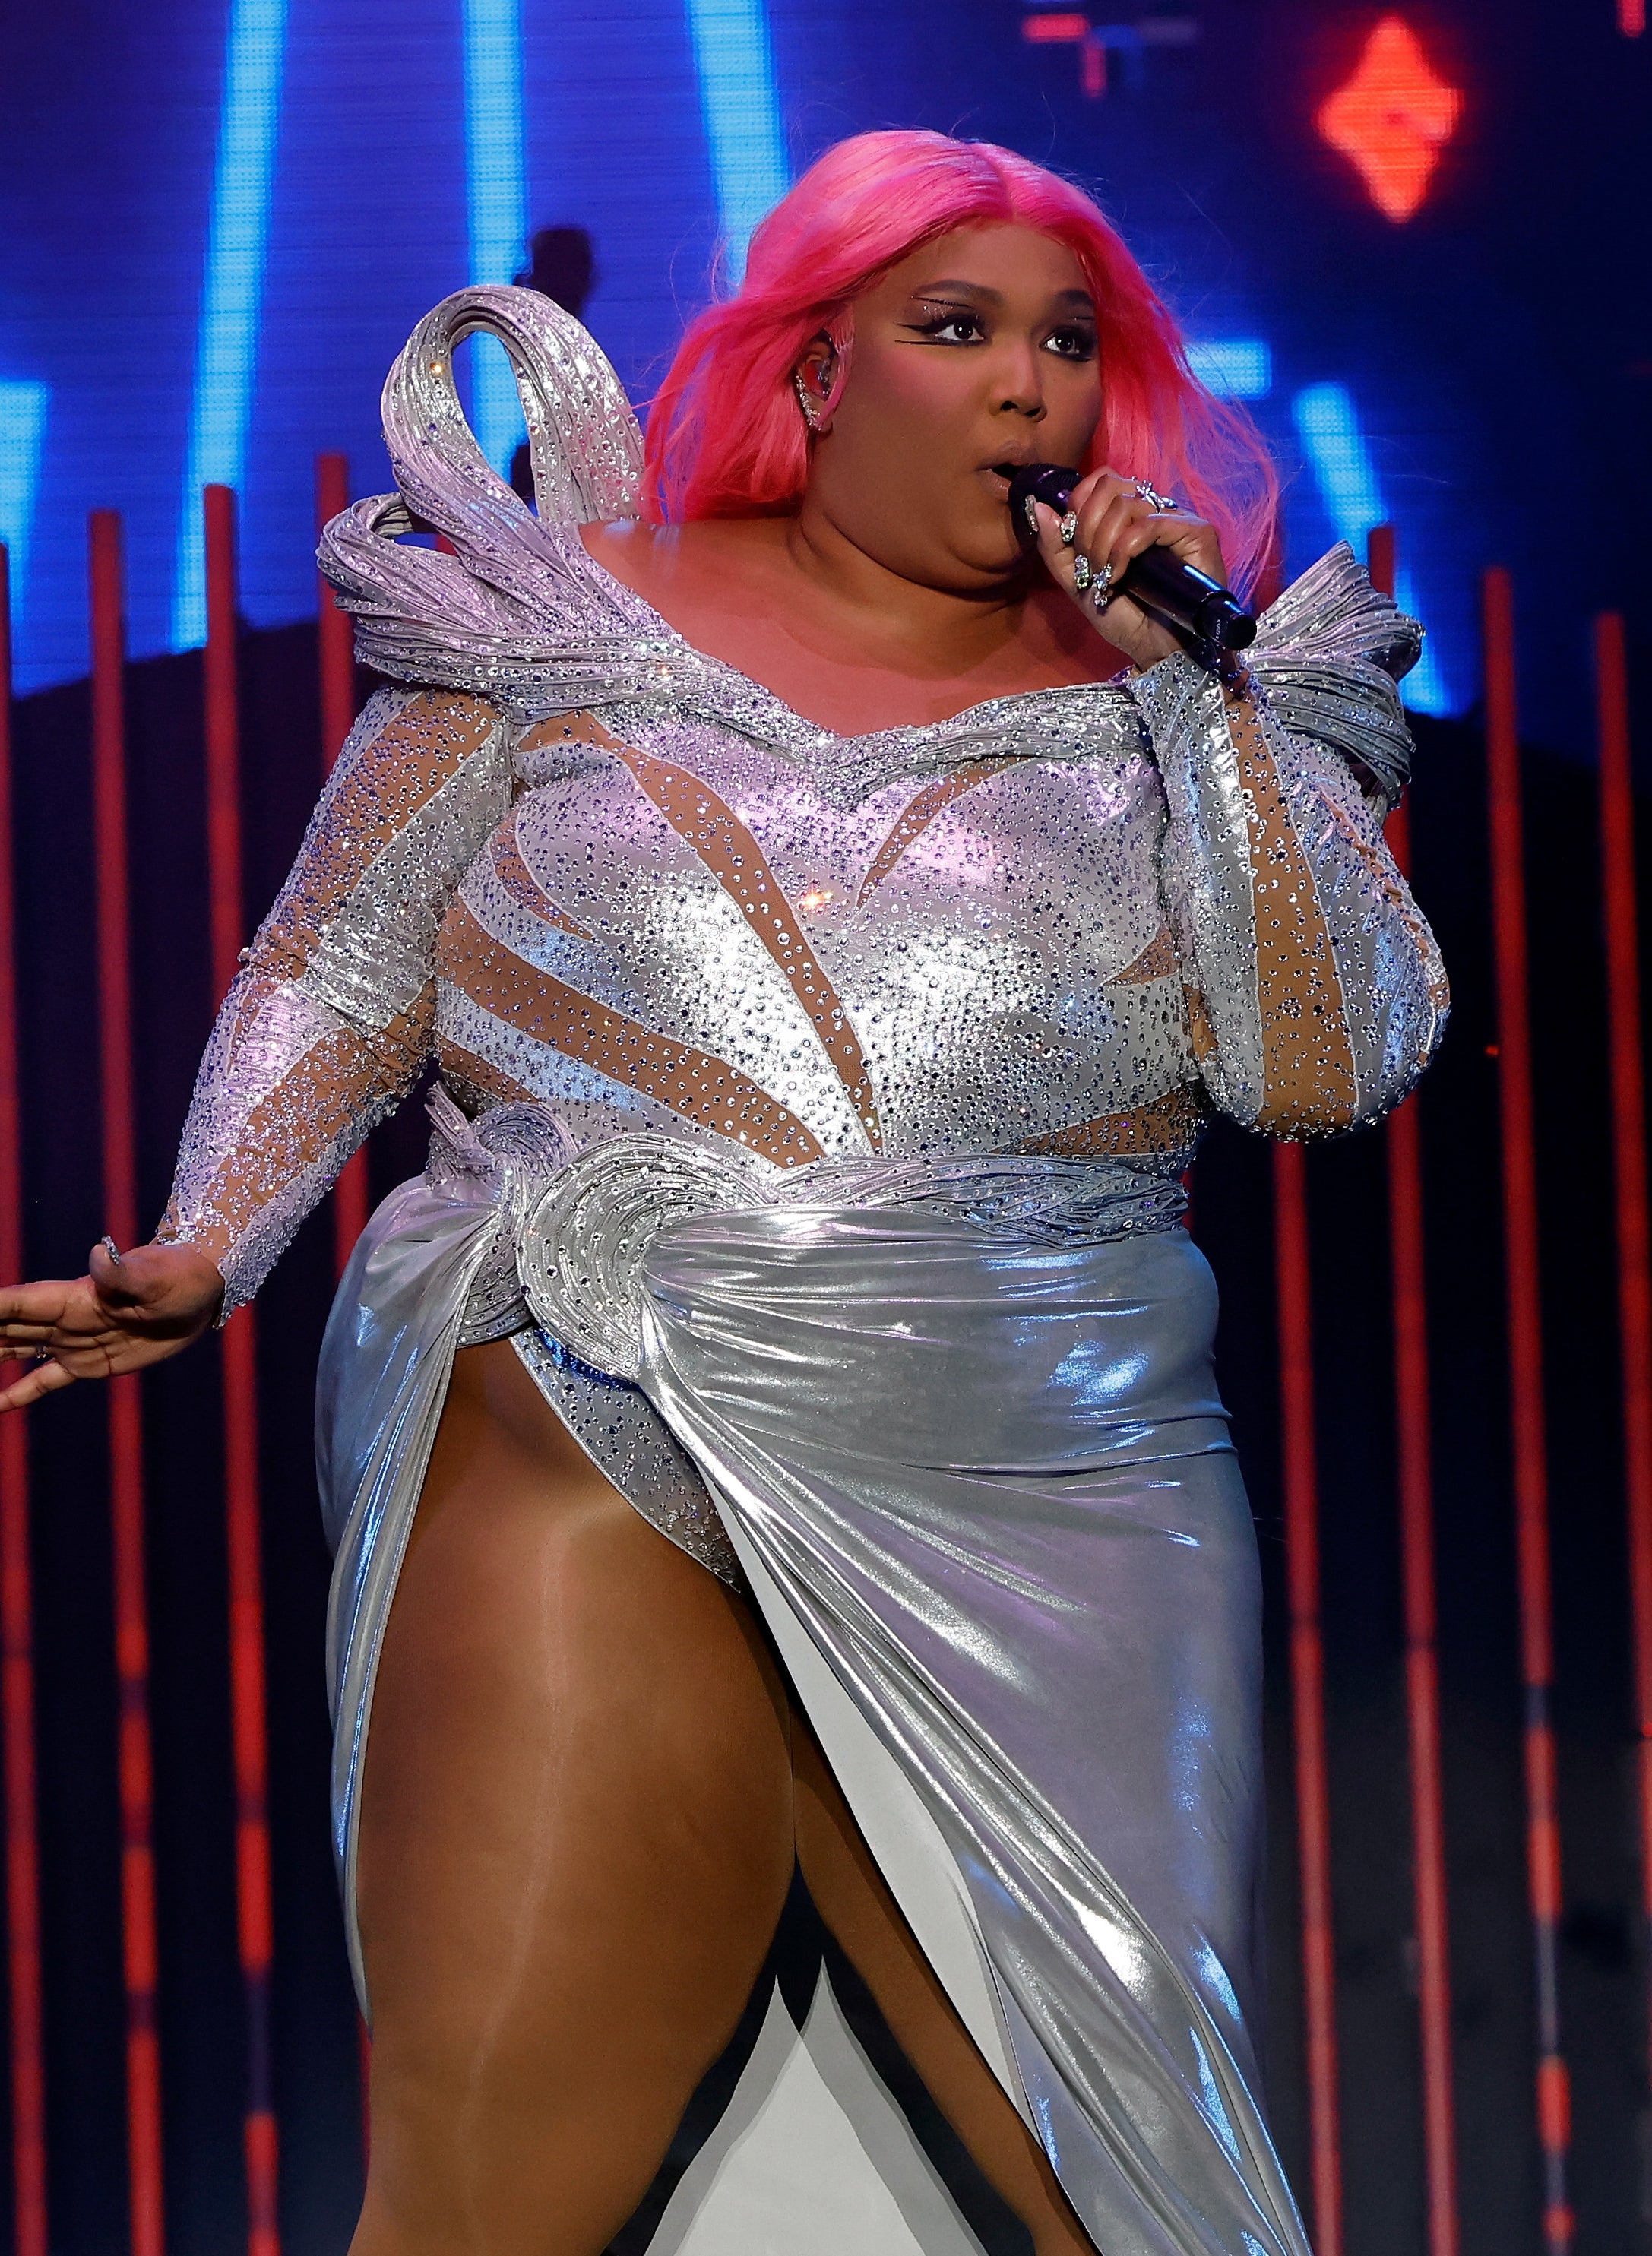 Close-up of Lizzo performing in a bejeweled leotard with a metallic skirt